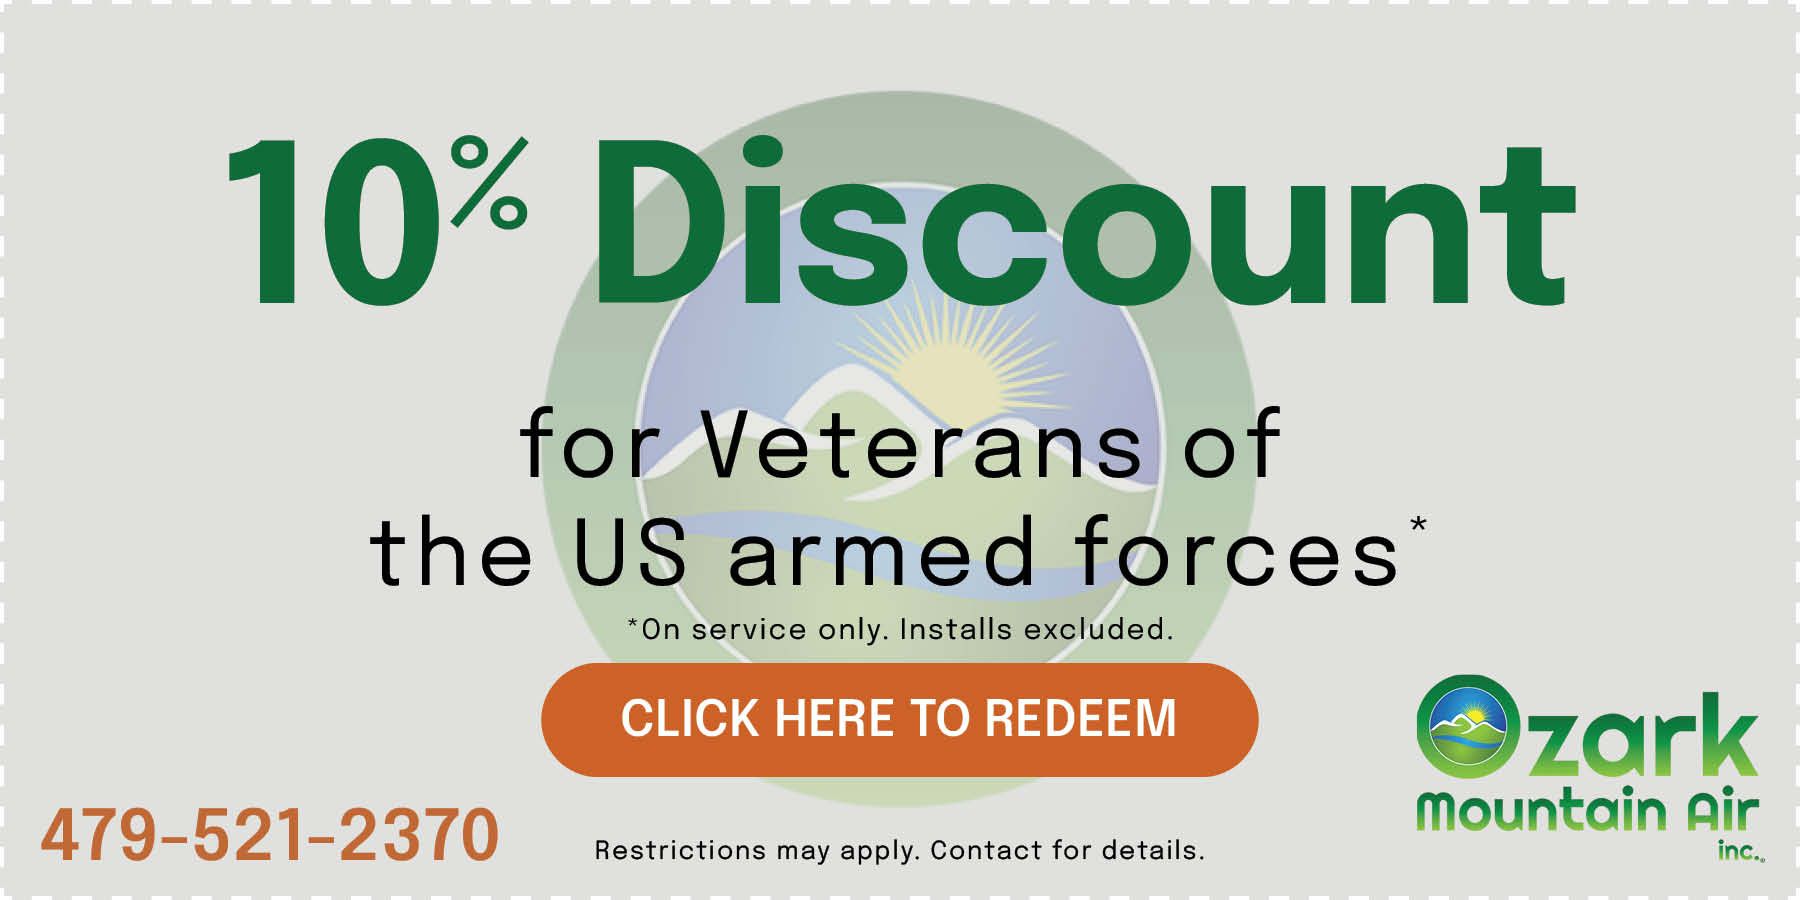 This is a coupon for 10% discount for veterans and US armed forces, click to redeem now.